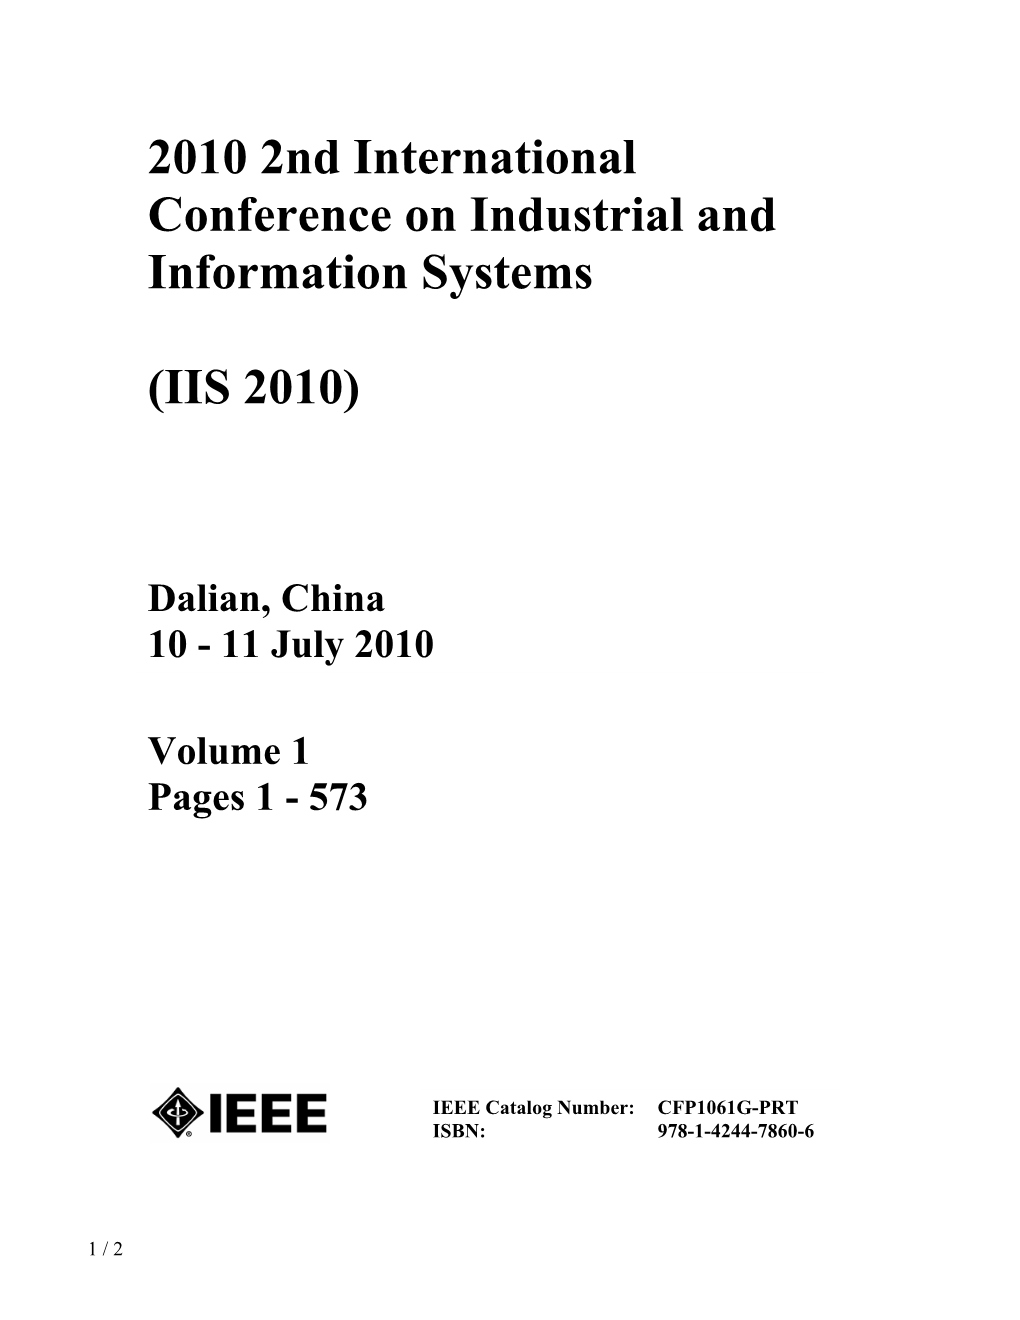 2010 2Nd International Conference on Industrial and Information Systems